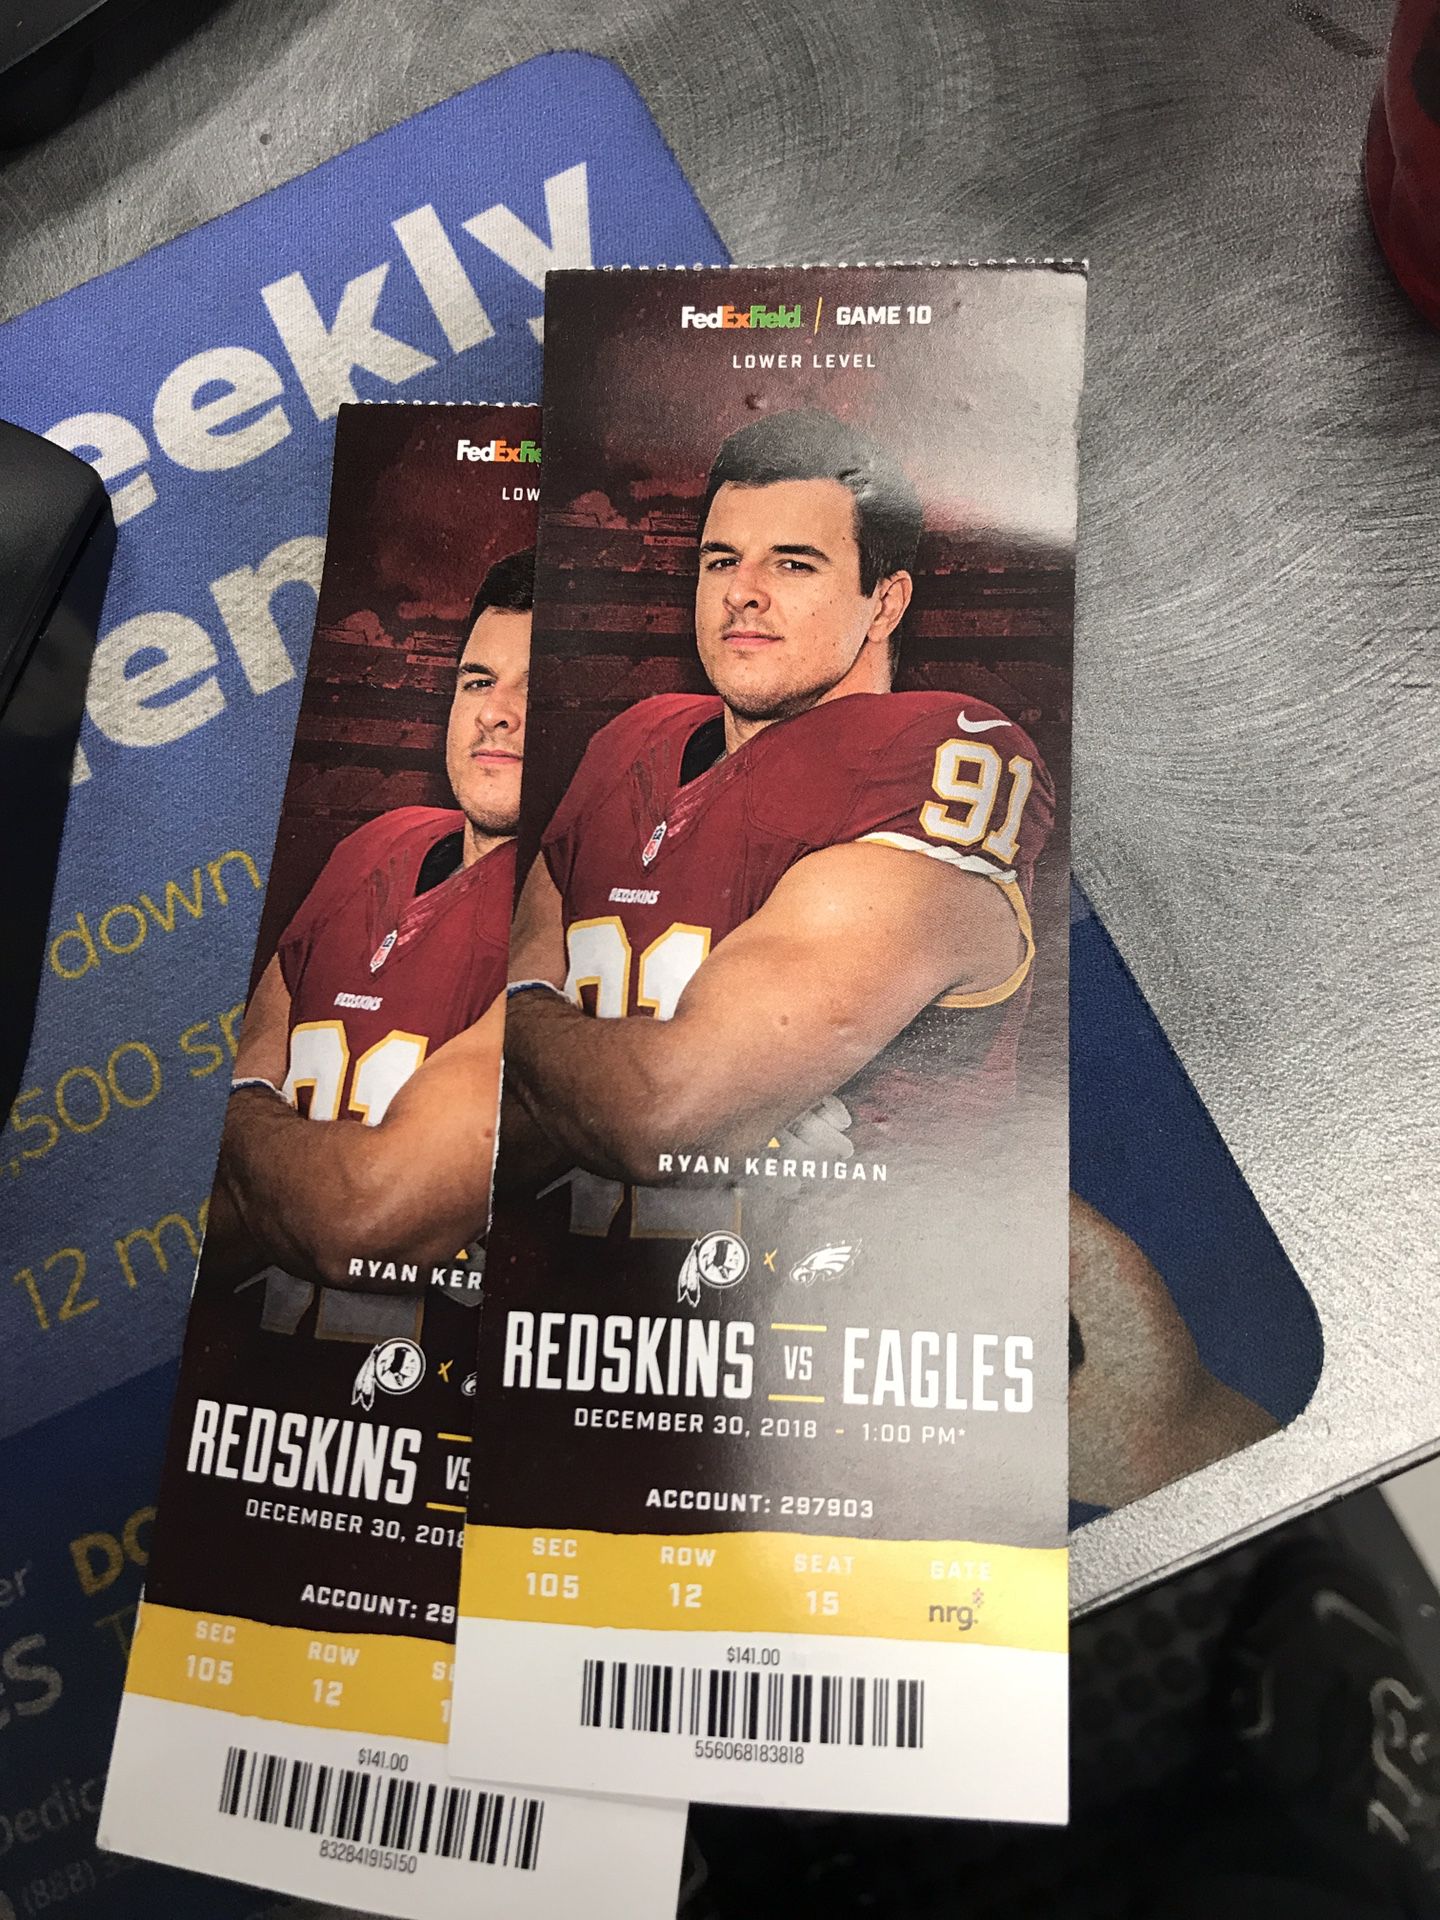 Redskins tickets for sale